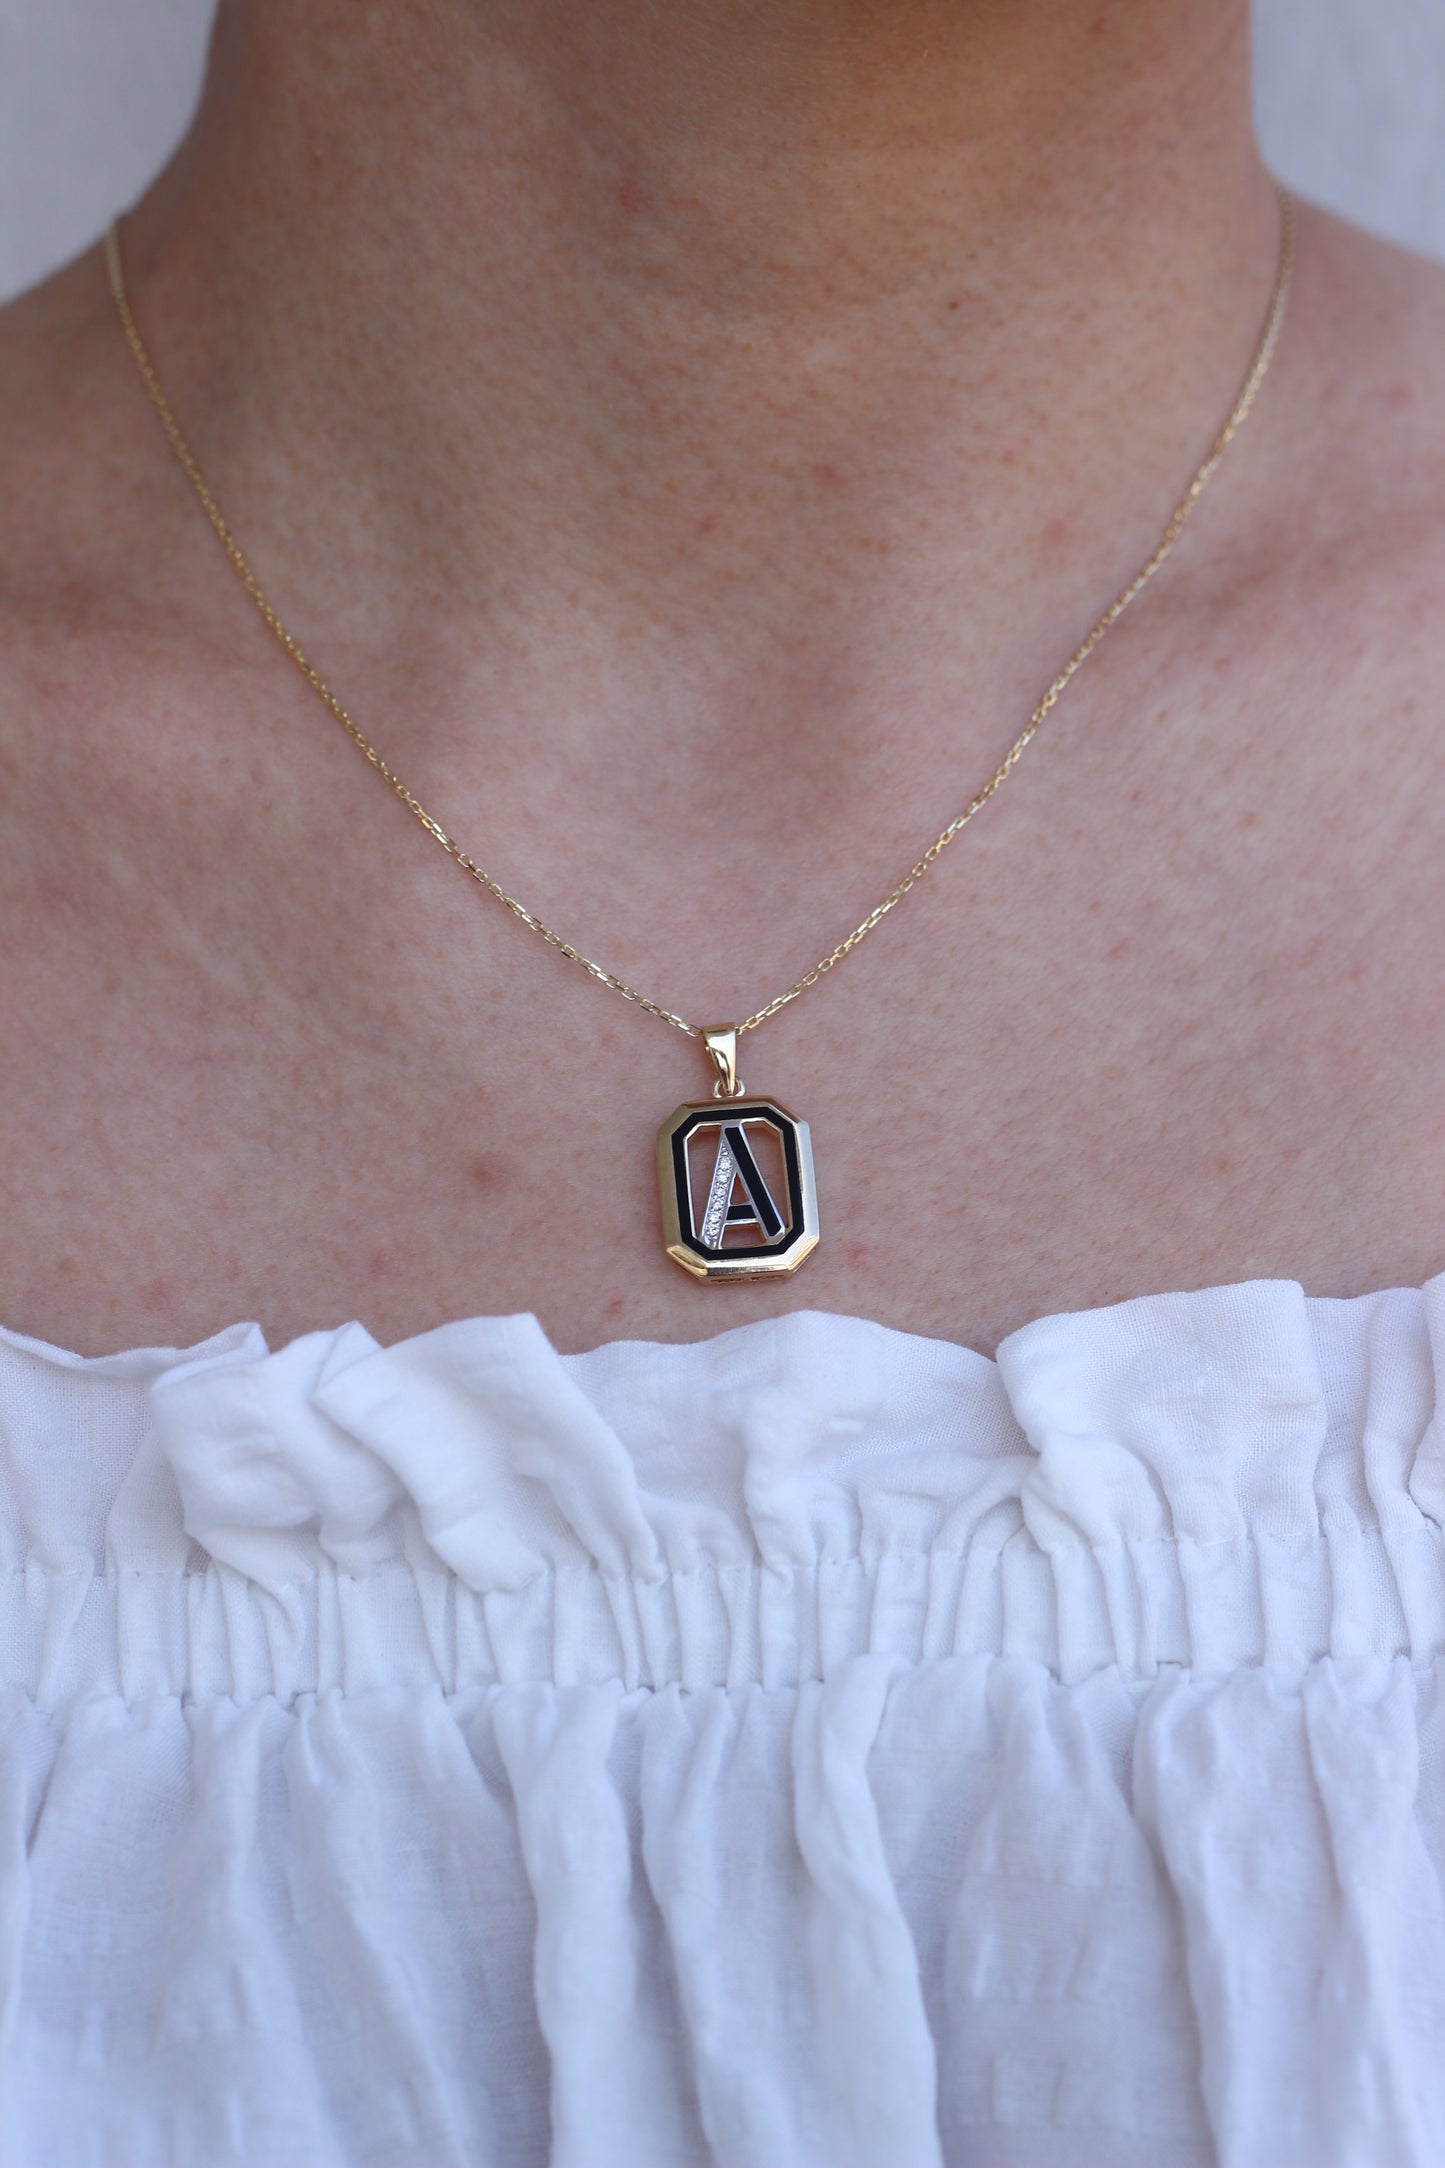 14k Gold Diamond A Letter Necklace, Initial Necklace, Gold Enamel Necklace, Handmade Necklace, Black Enamel Necklace, Birthday Gift, Gift For Her